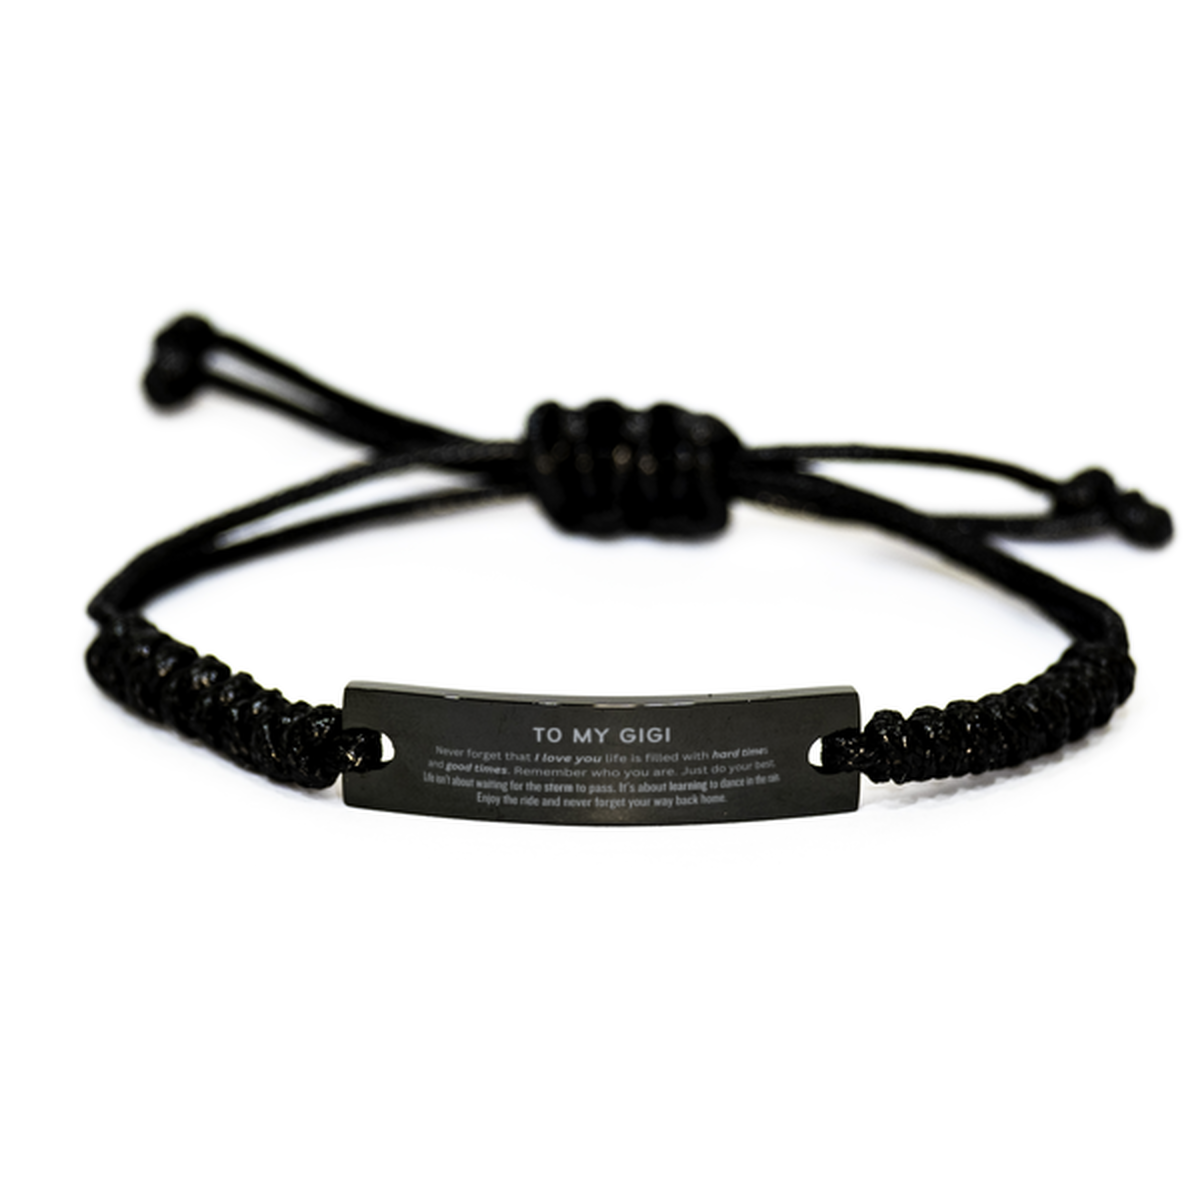 Christmas Gigi Black Rope Bracelet Gifts, To My Gigi Birthday Thank You Gifts For Gigi, Graduation Unique Gifts For Gigi To My Gigi Never forget that I love you life is filled with hard times and good times. Remember who you are. Just do your best